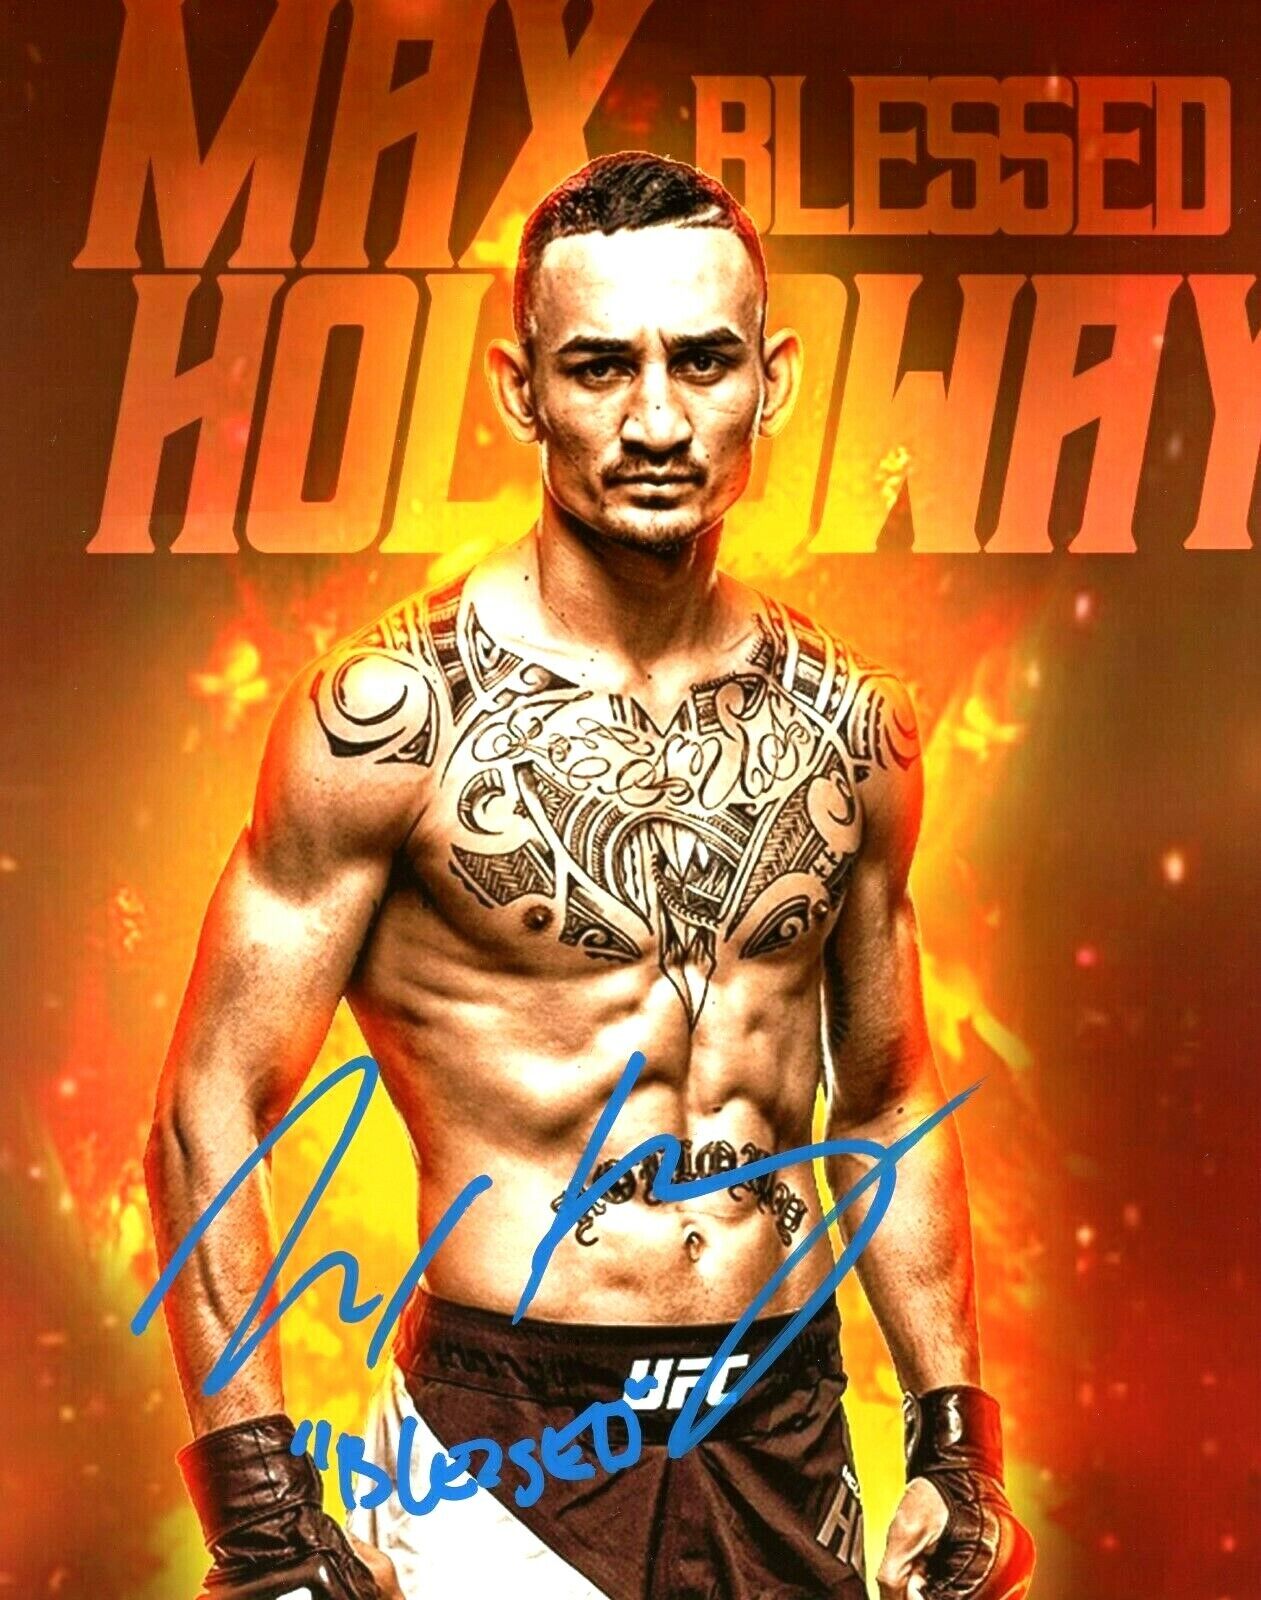 UFC MAX HOLLOWAY HAND SIGNED AUTOGRAPHED INSCRIBED 8X10 Photo Poster painting WITH PROOF & COA 1